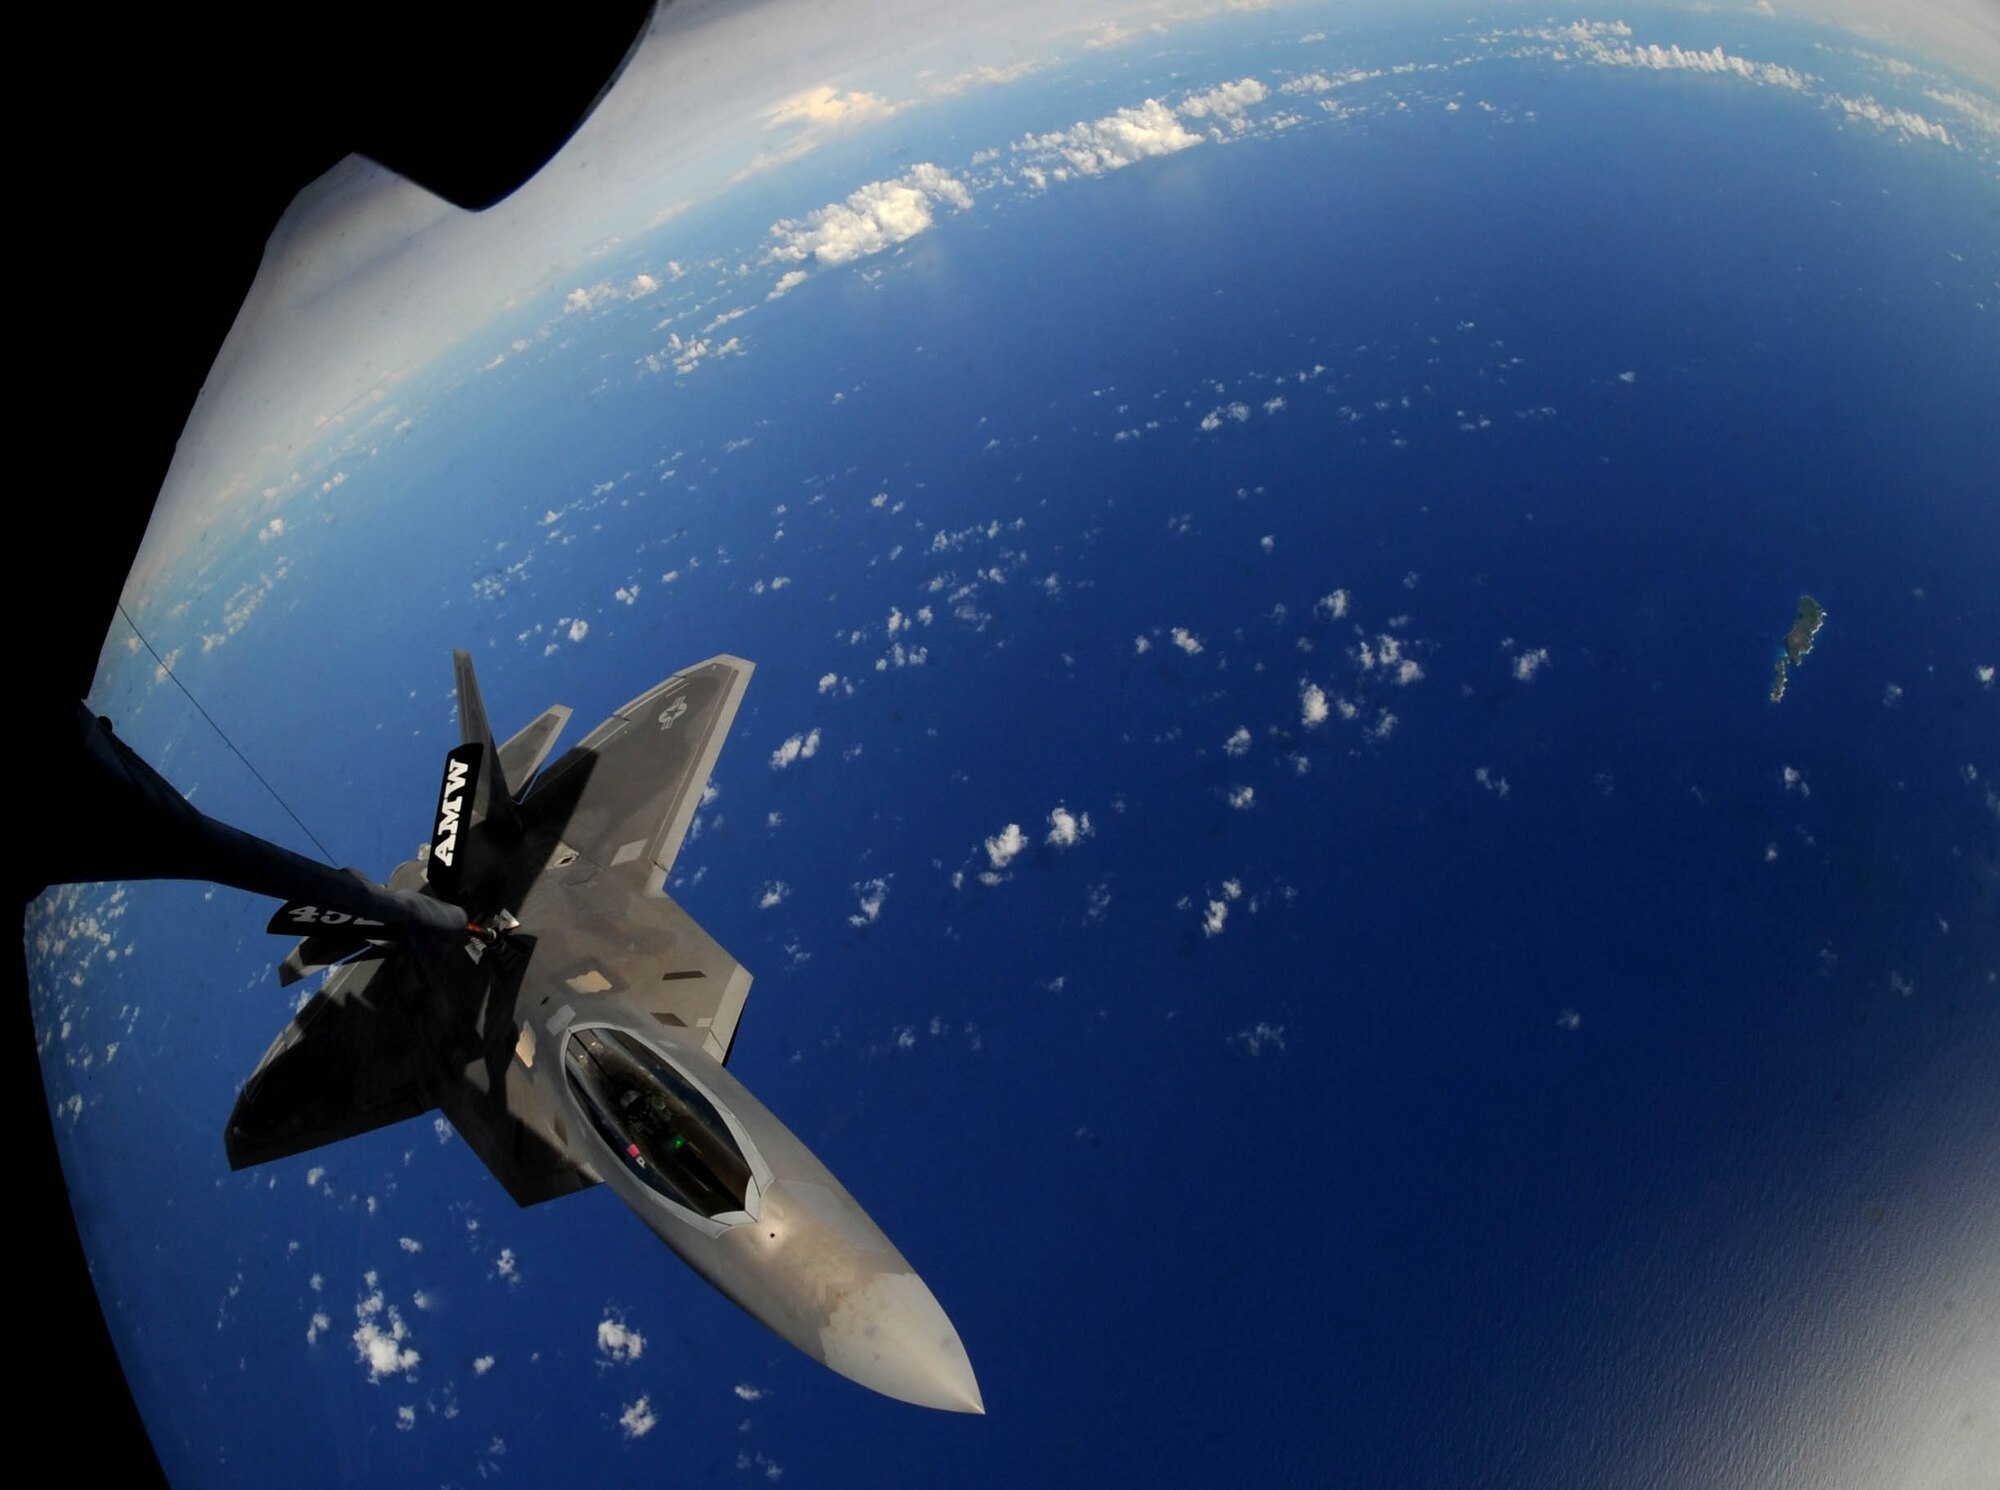 A F-22 Raptor approaches the boom of a KC-135 Stratotanker to refuel over
the Pacific Ocean Aug. 13.  KC-135 Stratotankers, F-22 Raptors and B-52
Stratofortress bombers took part in the 2009 Inaugural Turkey Shoot, which
allows air expeditionary units to plan and execute tactical missions with
airframes that don't regularly train together. The F-22s are deployed from
Elmendorf Air Force Base, Alaska, to Andersen AFB, Guam, to support U.S.
Pacific Command's Theater Security Package in the Asia-Pacific region.
(U.S. Air Force photo/Senior Airman Christopher Bush)